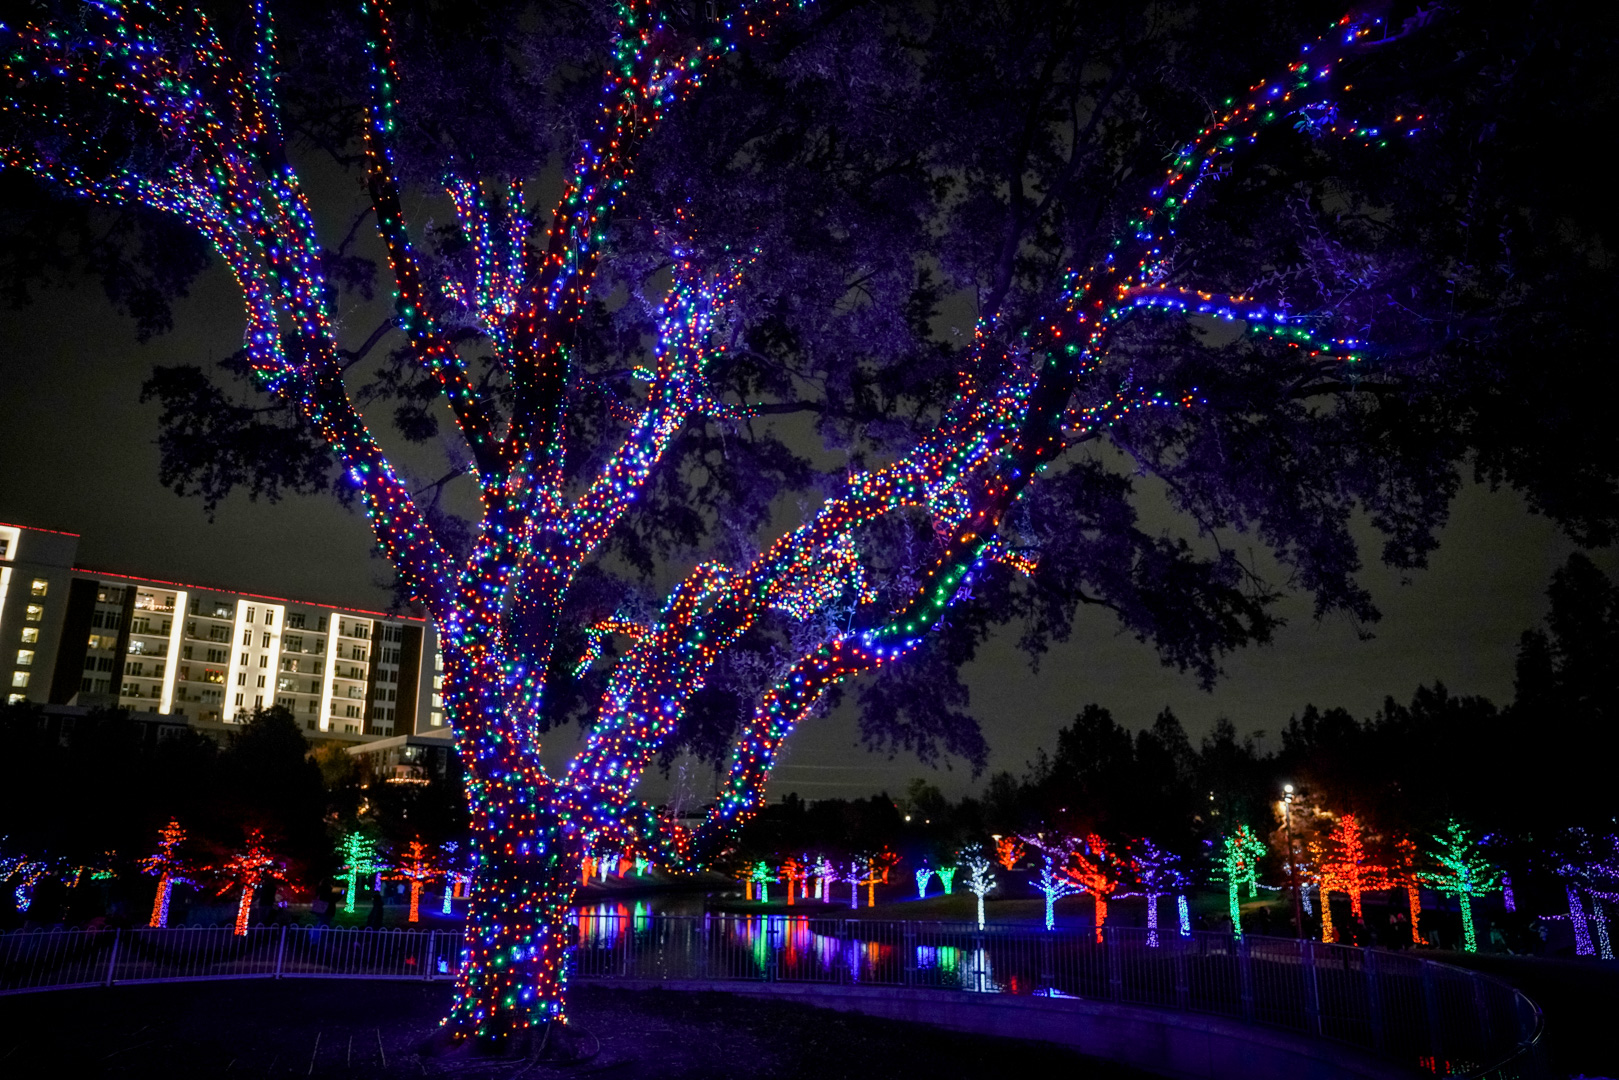 A large tree with lights and a pond with trees along the pond edge